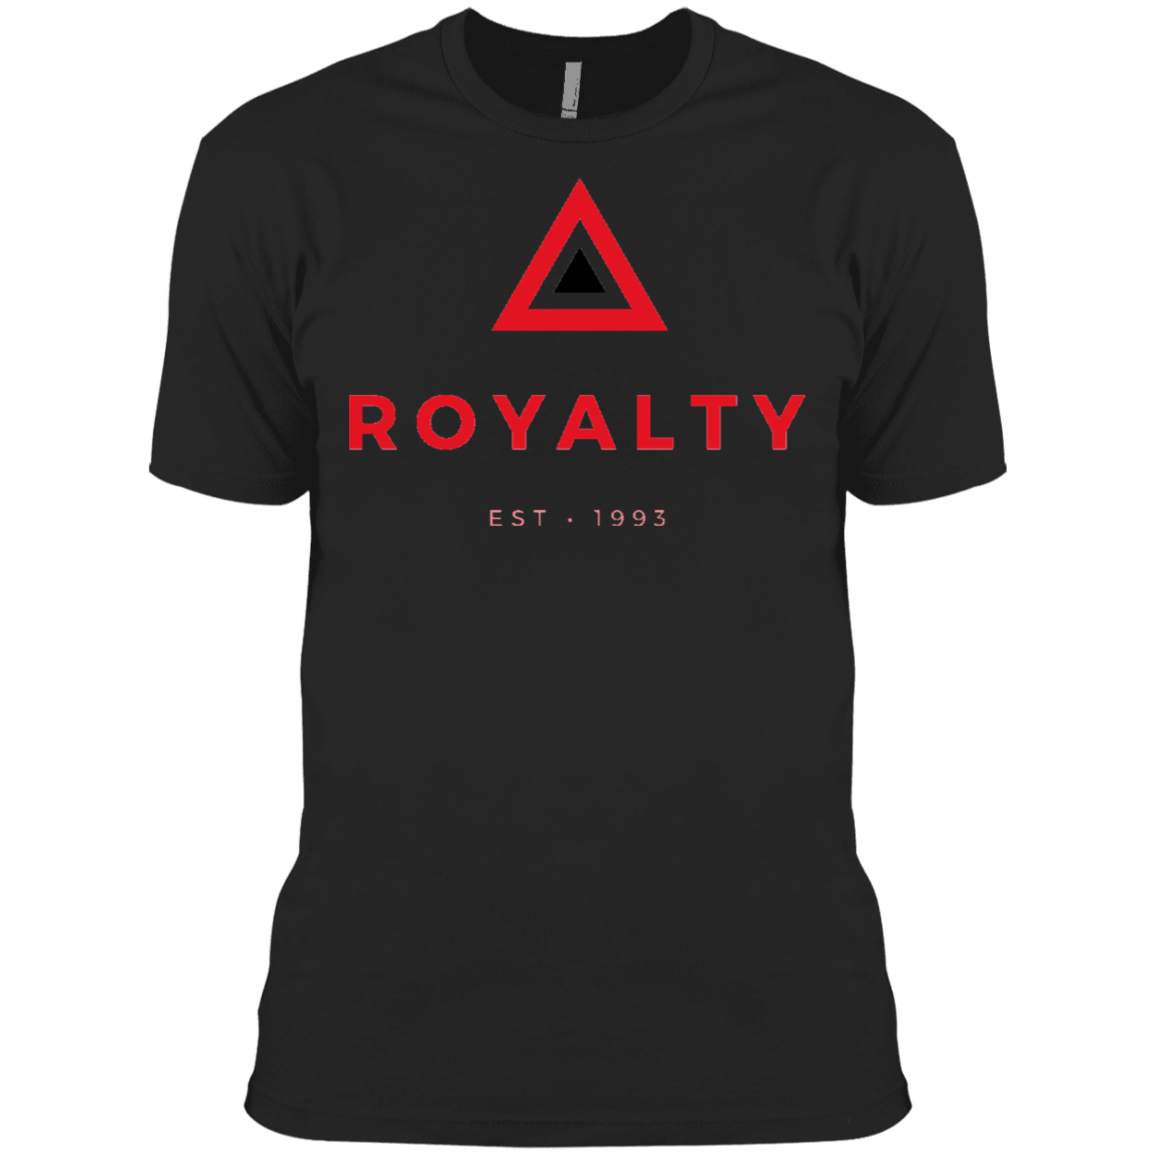 Royalty Red Men's Made in USA Cotton T-Shirt